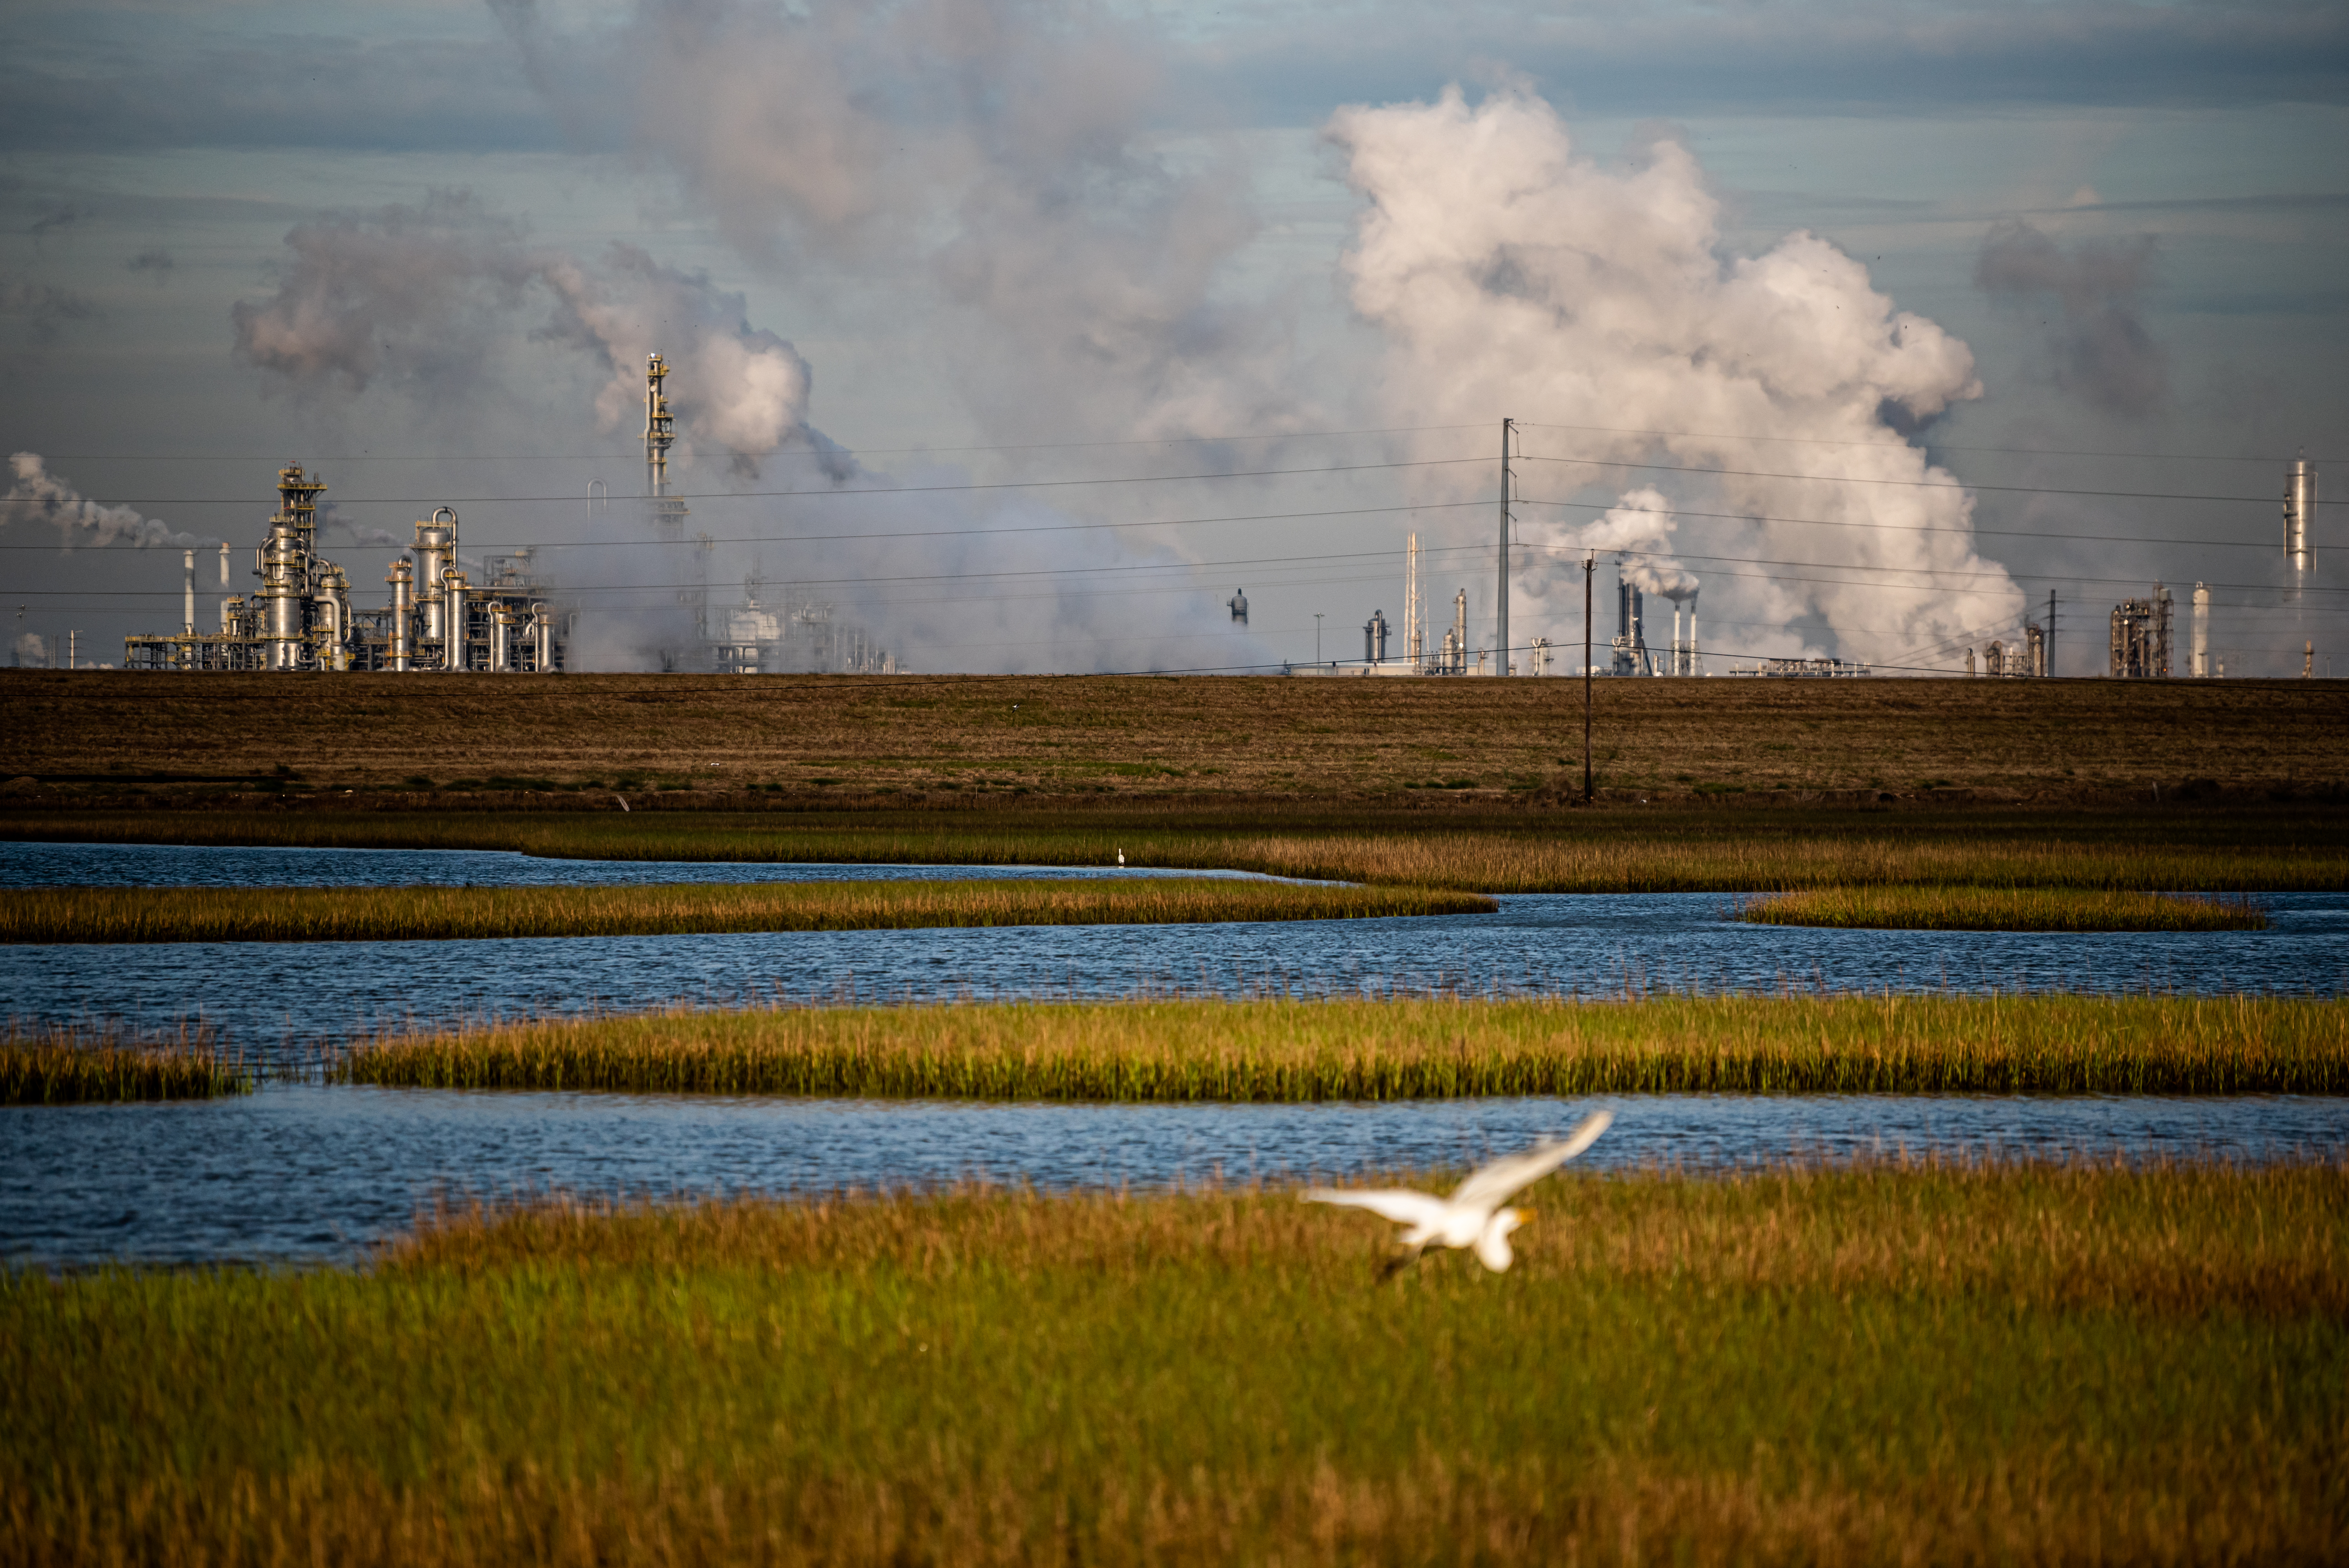 A white seabird catches a breeze above a marshy part of the Brazos, looking for food in the seagrass. in the background, petrochemical plants steam.